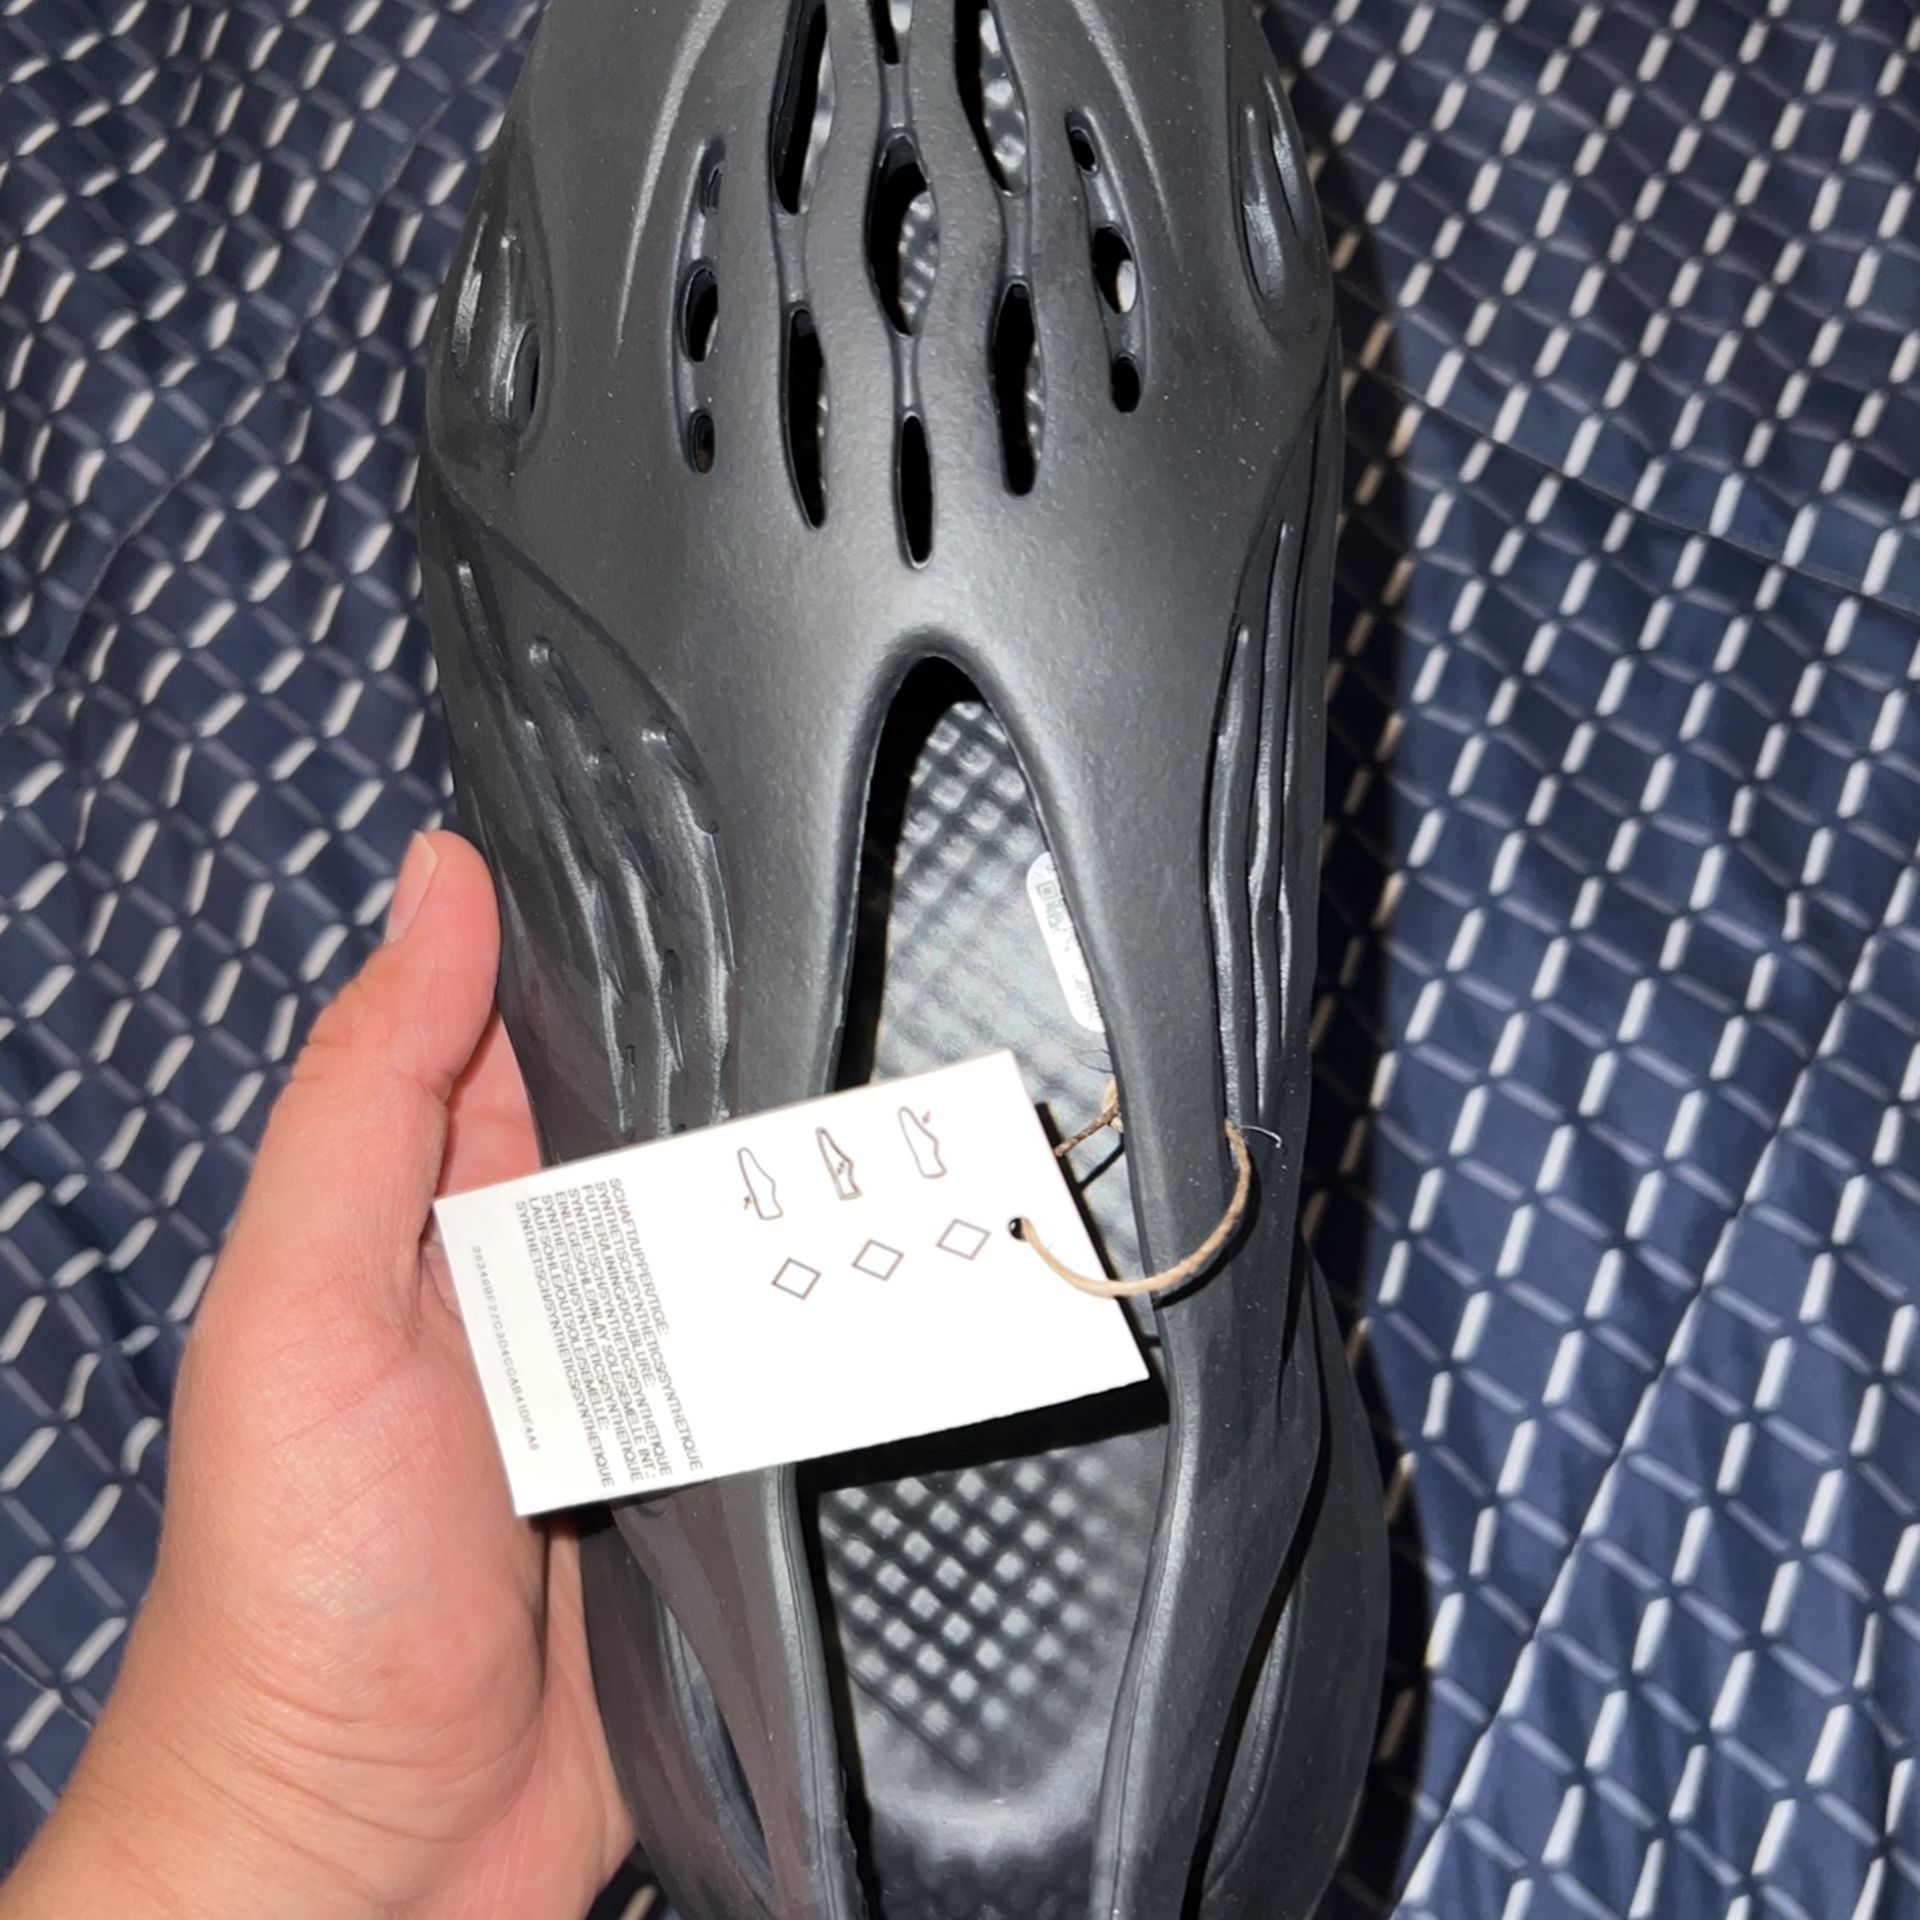 Adidas Yeezy Foam Runners (Onyx) for Sale in Moreno Valley, CA - OfferUp